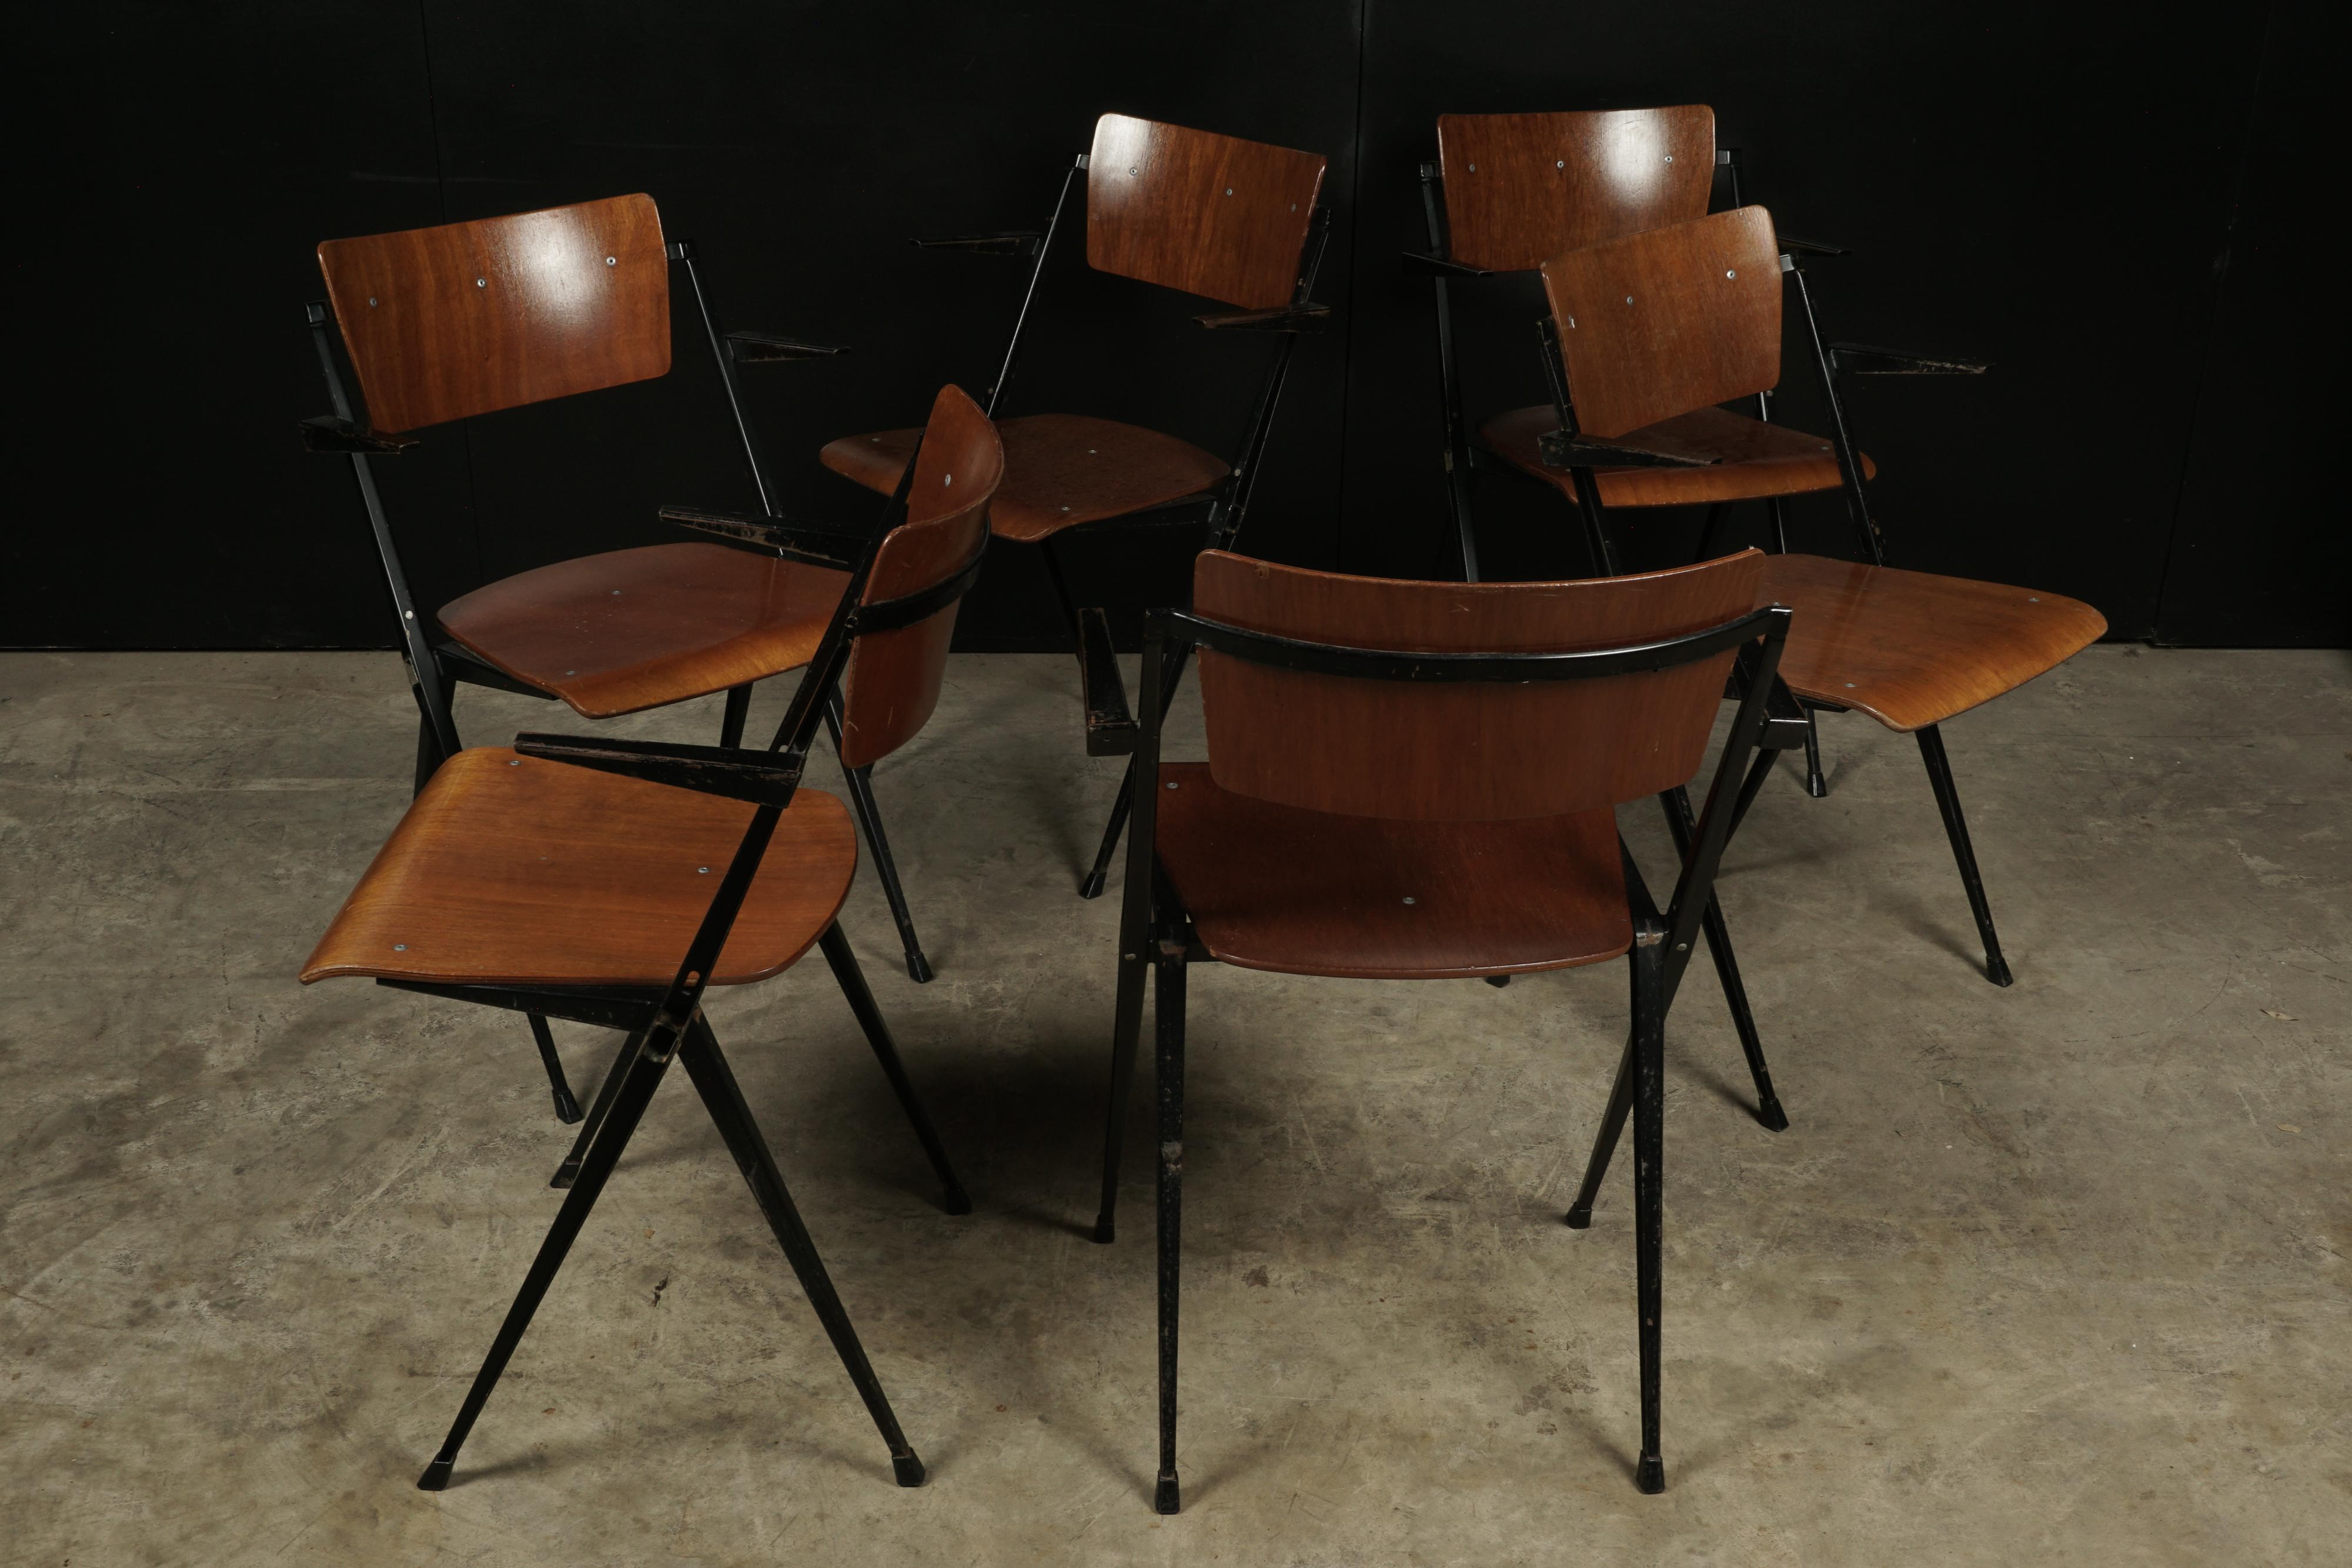 European Rare Set of Six Stacking Chairs Designed by Wm. Rietveld, circa 1960 For Sale